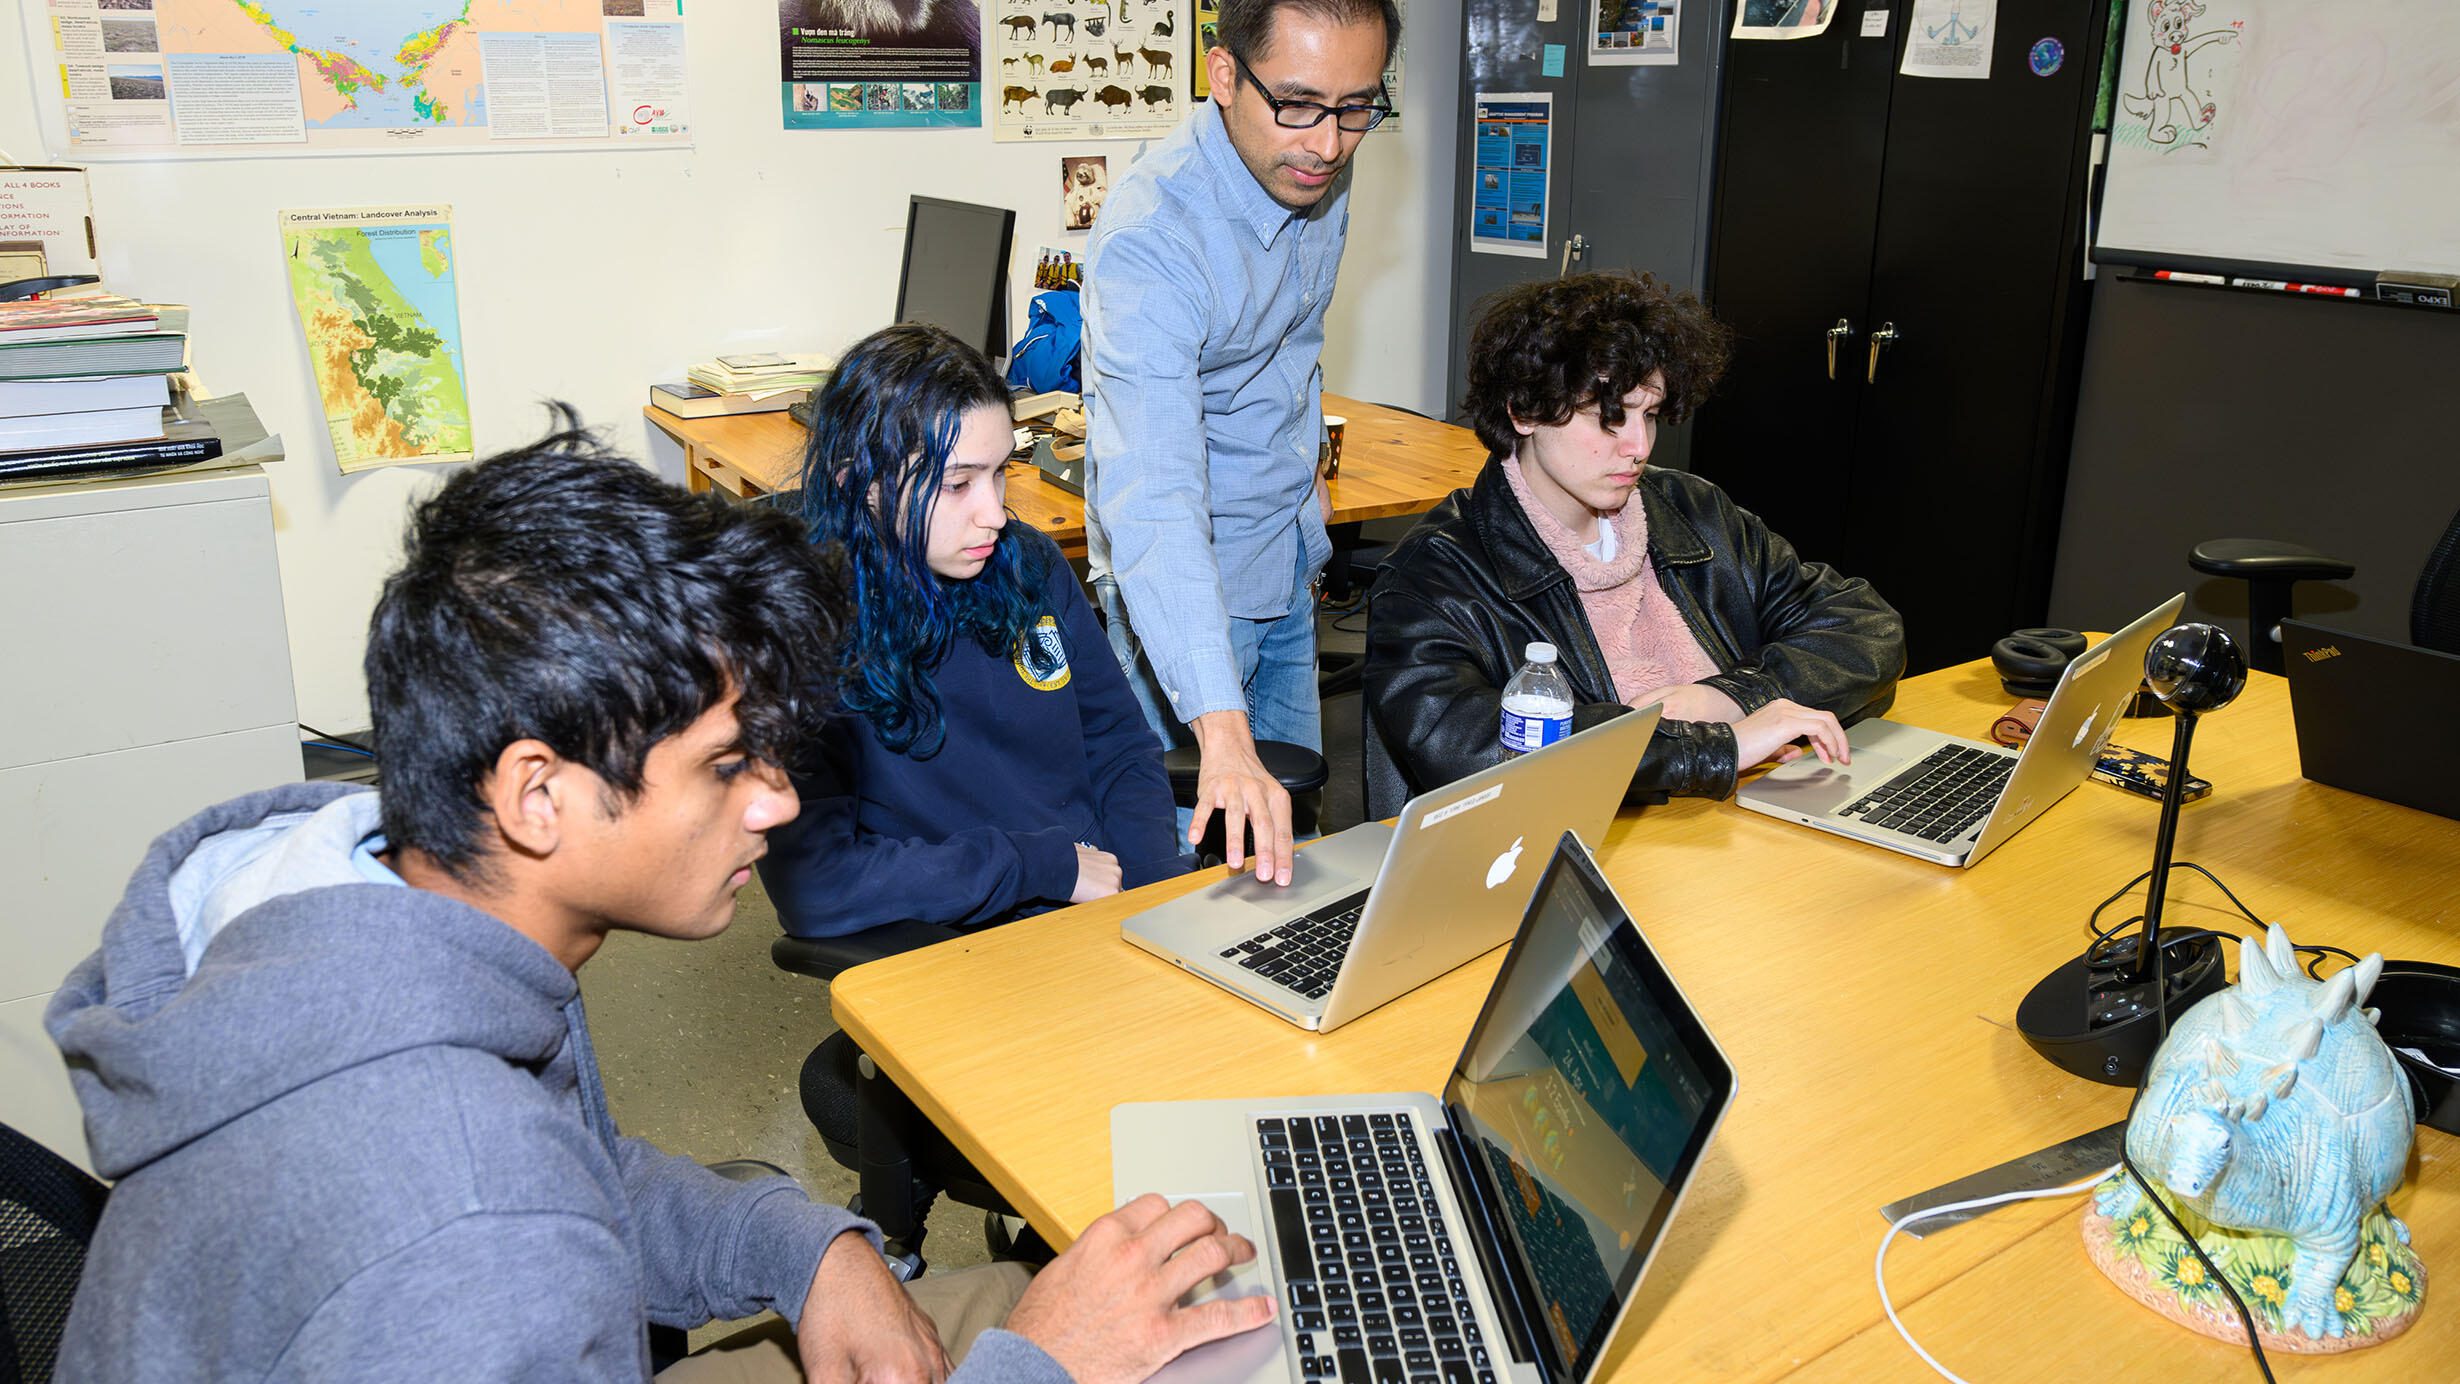 Three students from the Science Research Mentoring Program sit at a large desk on their laptops as an instructor helps one of them.